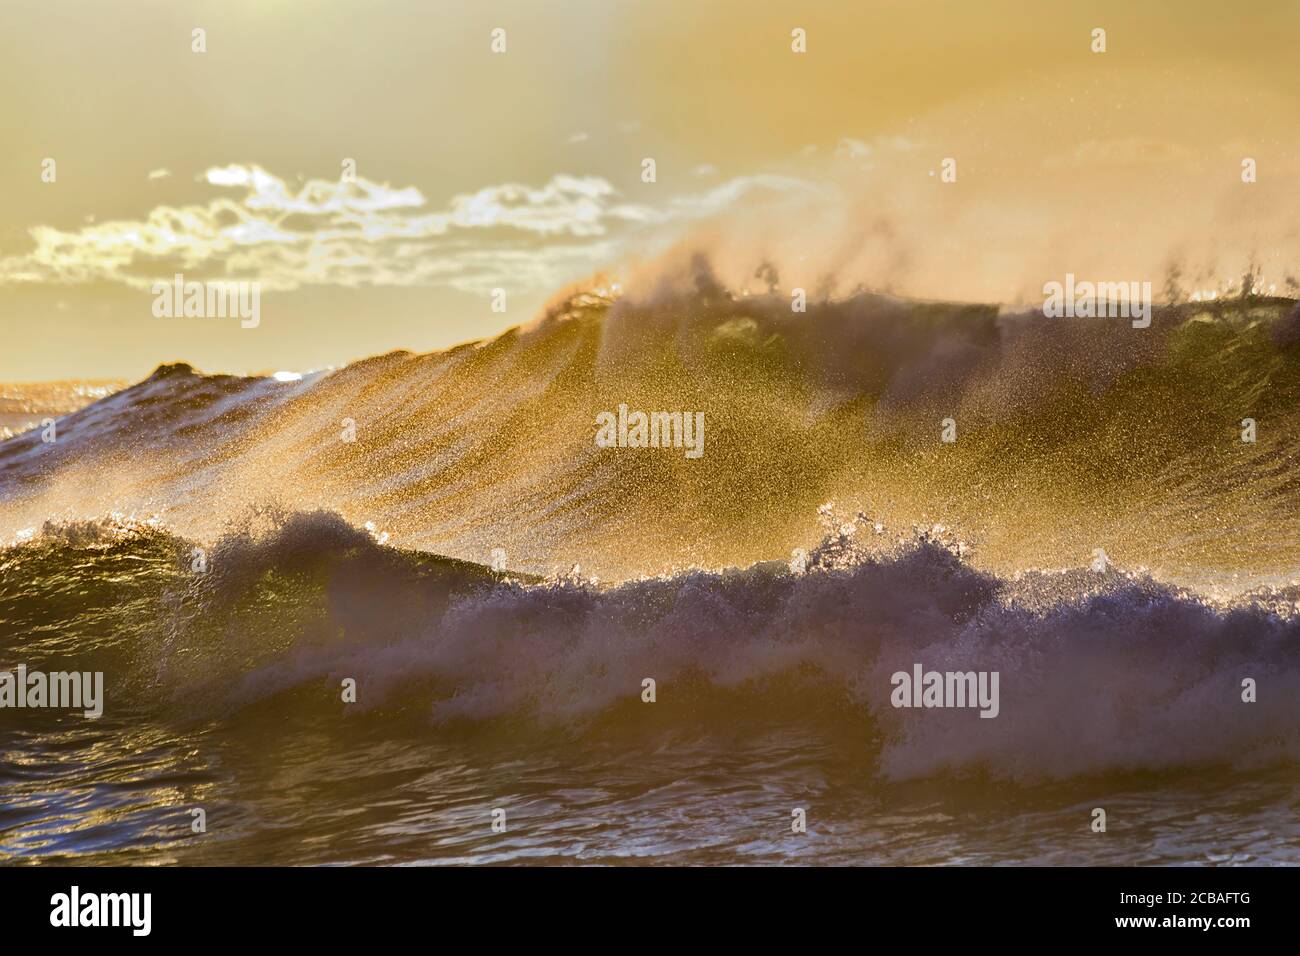 Wave by wave rolling on sandy Bronte beach of Sydney eastern suburbs at stormy swell in soft morning sun light. Stock Photo